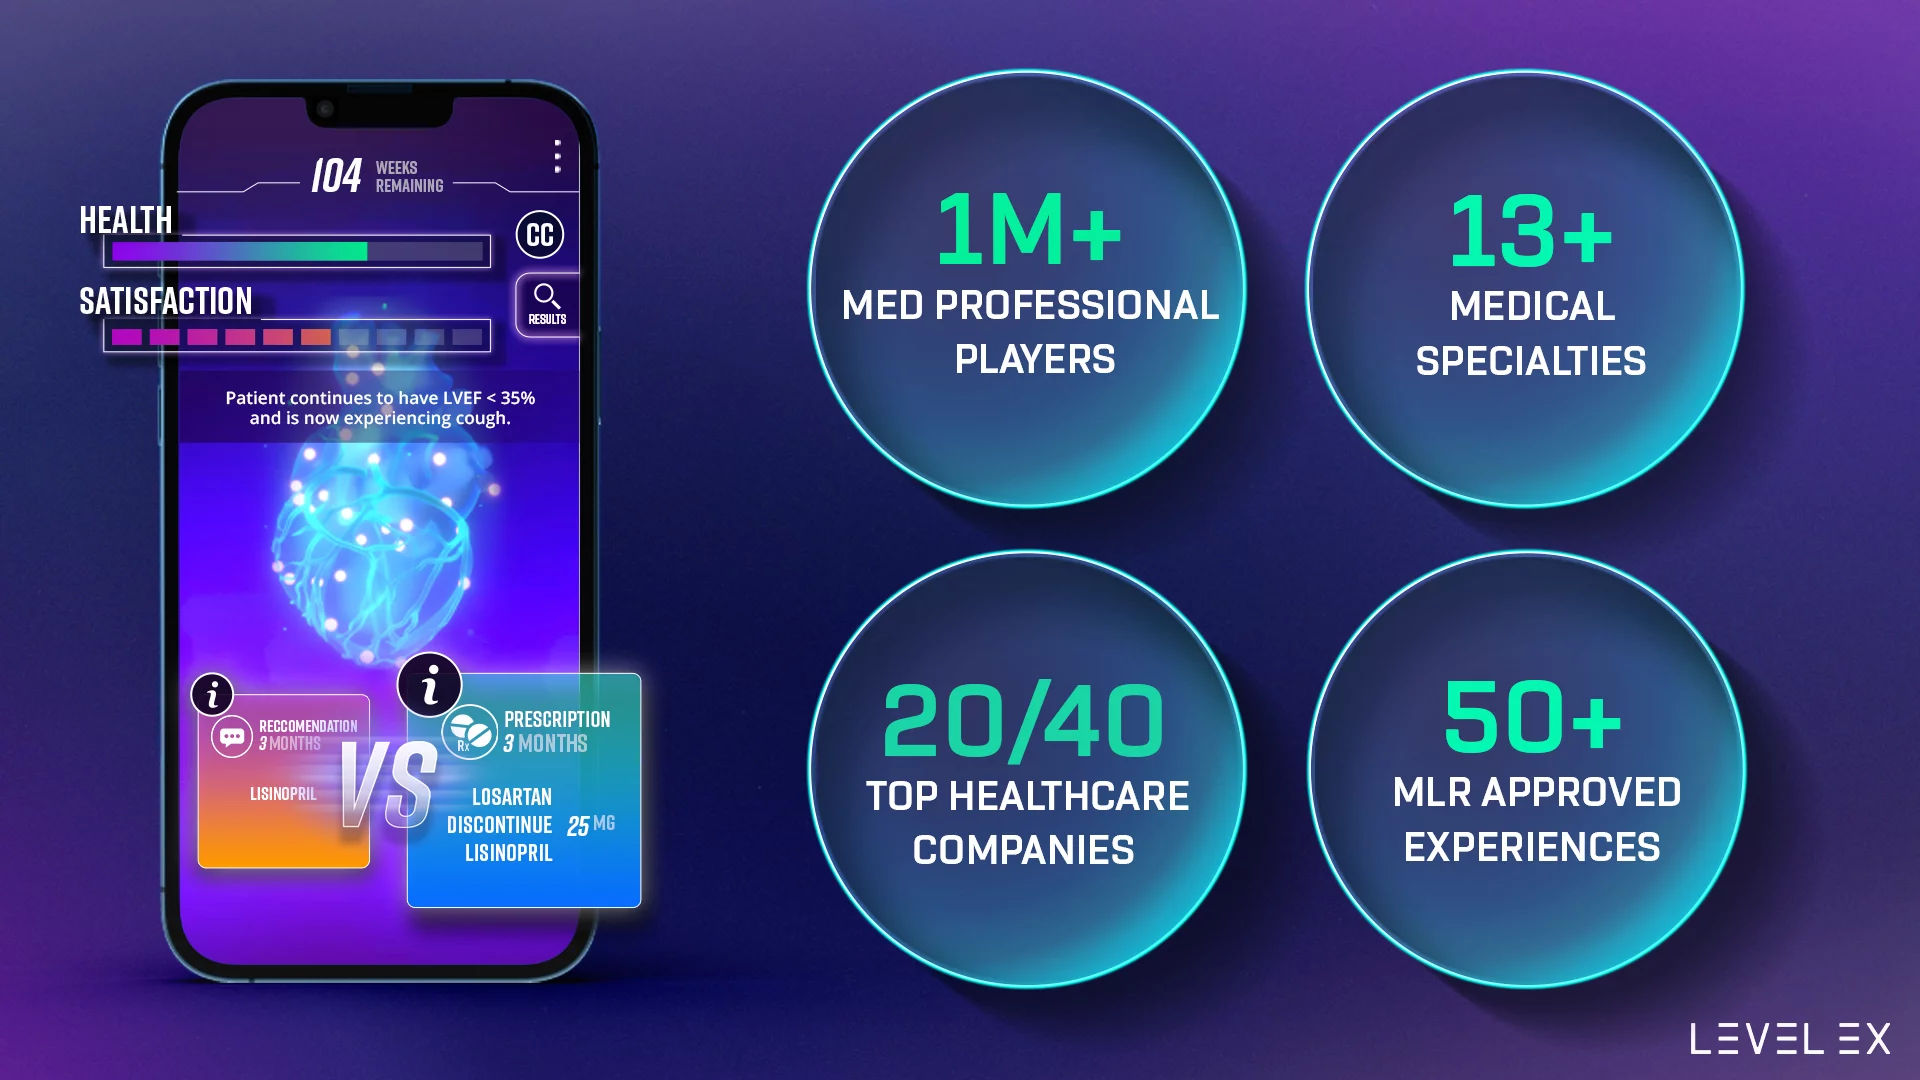 Level Ex games are played by over one million  medical professionals across 13 medical specialties.  Level Ex works with the top med tech and pharma companies. 